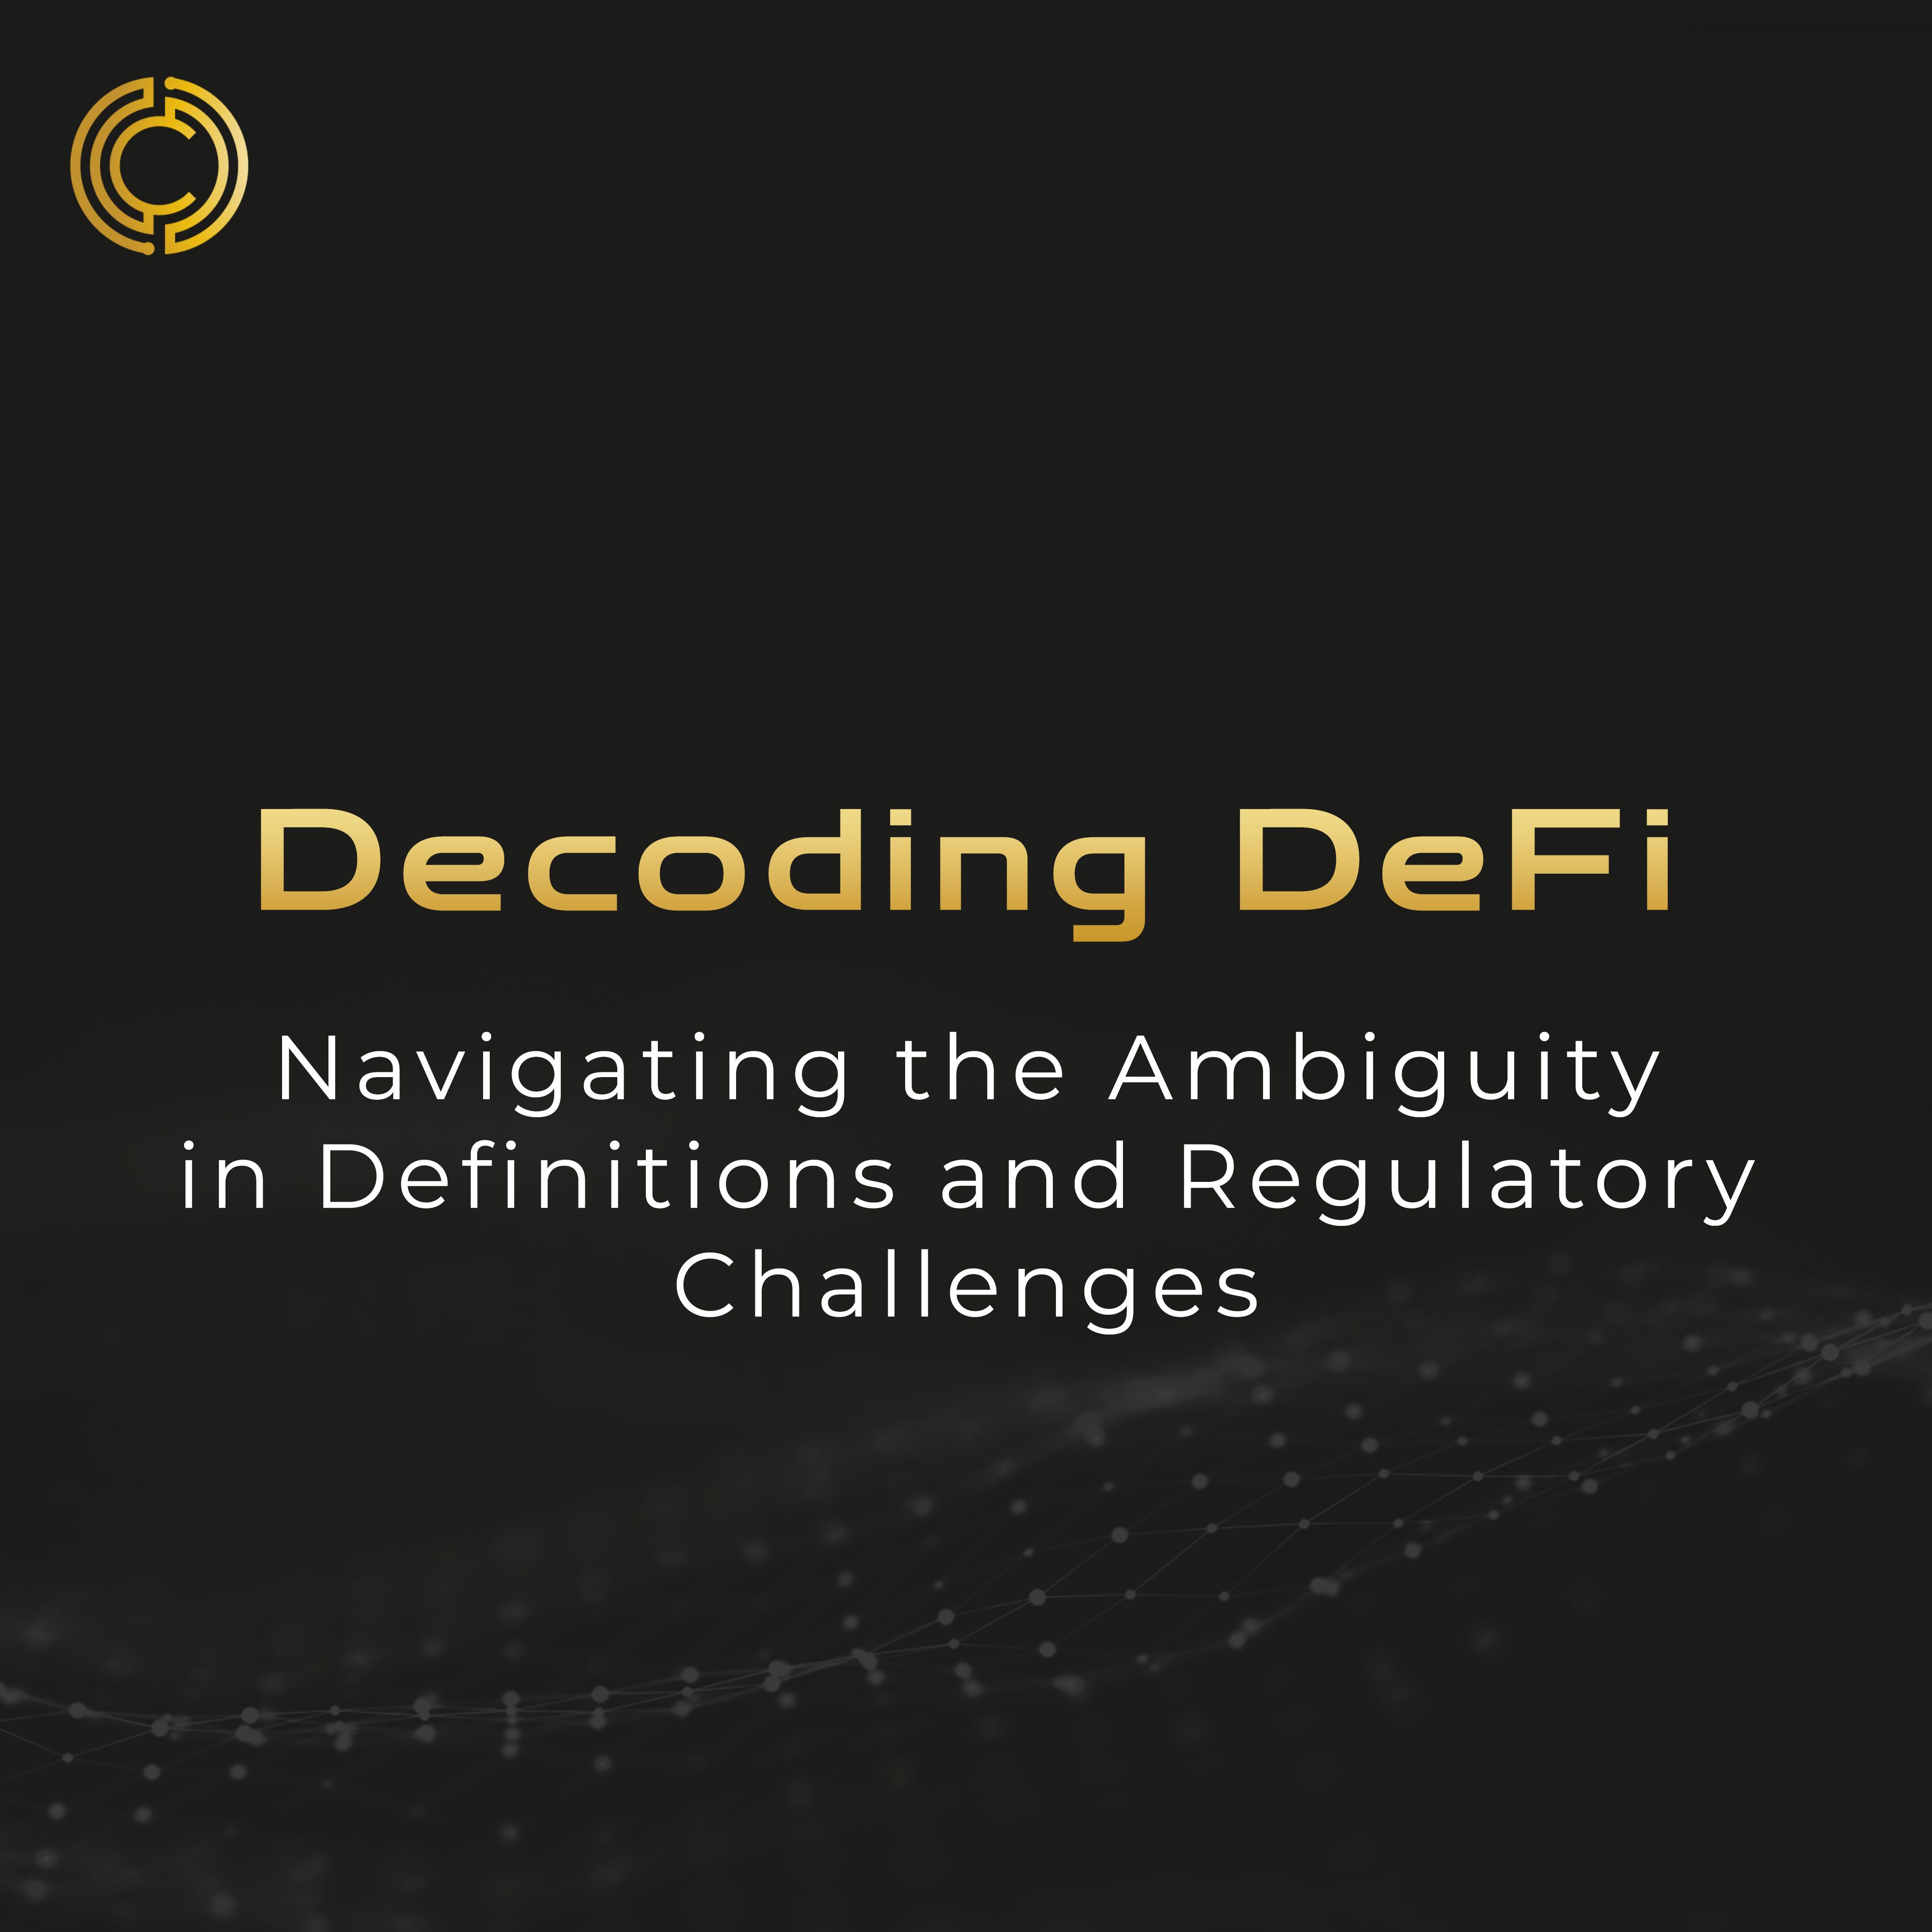 Decoding DeFi: Navigating the Ambiguity in Definitions and Regulatory Challenges